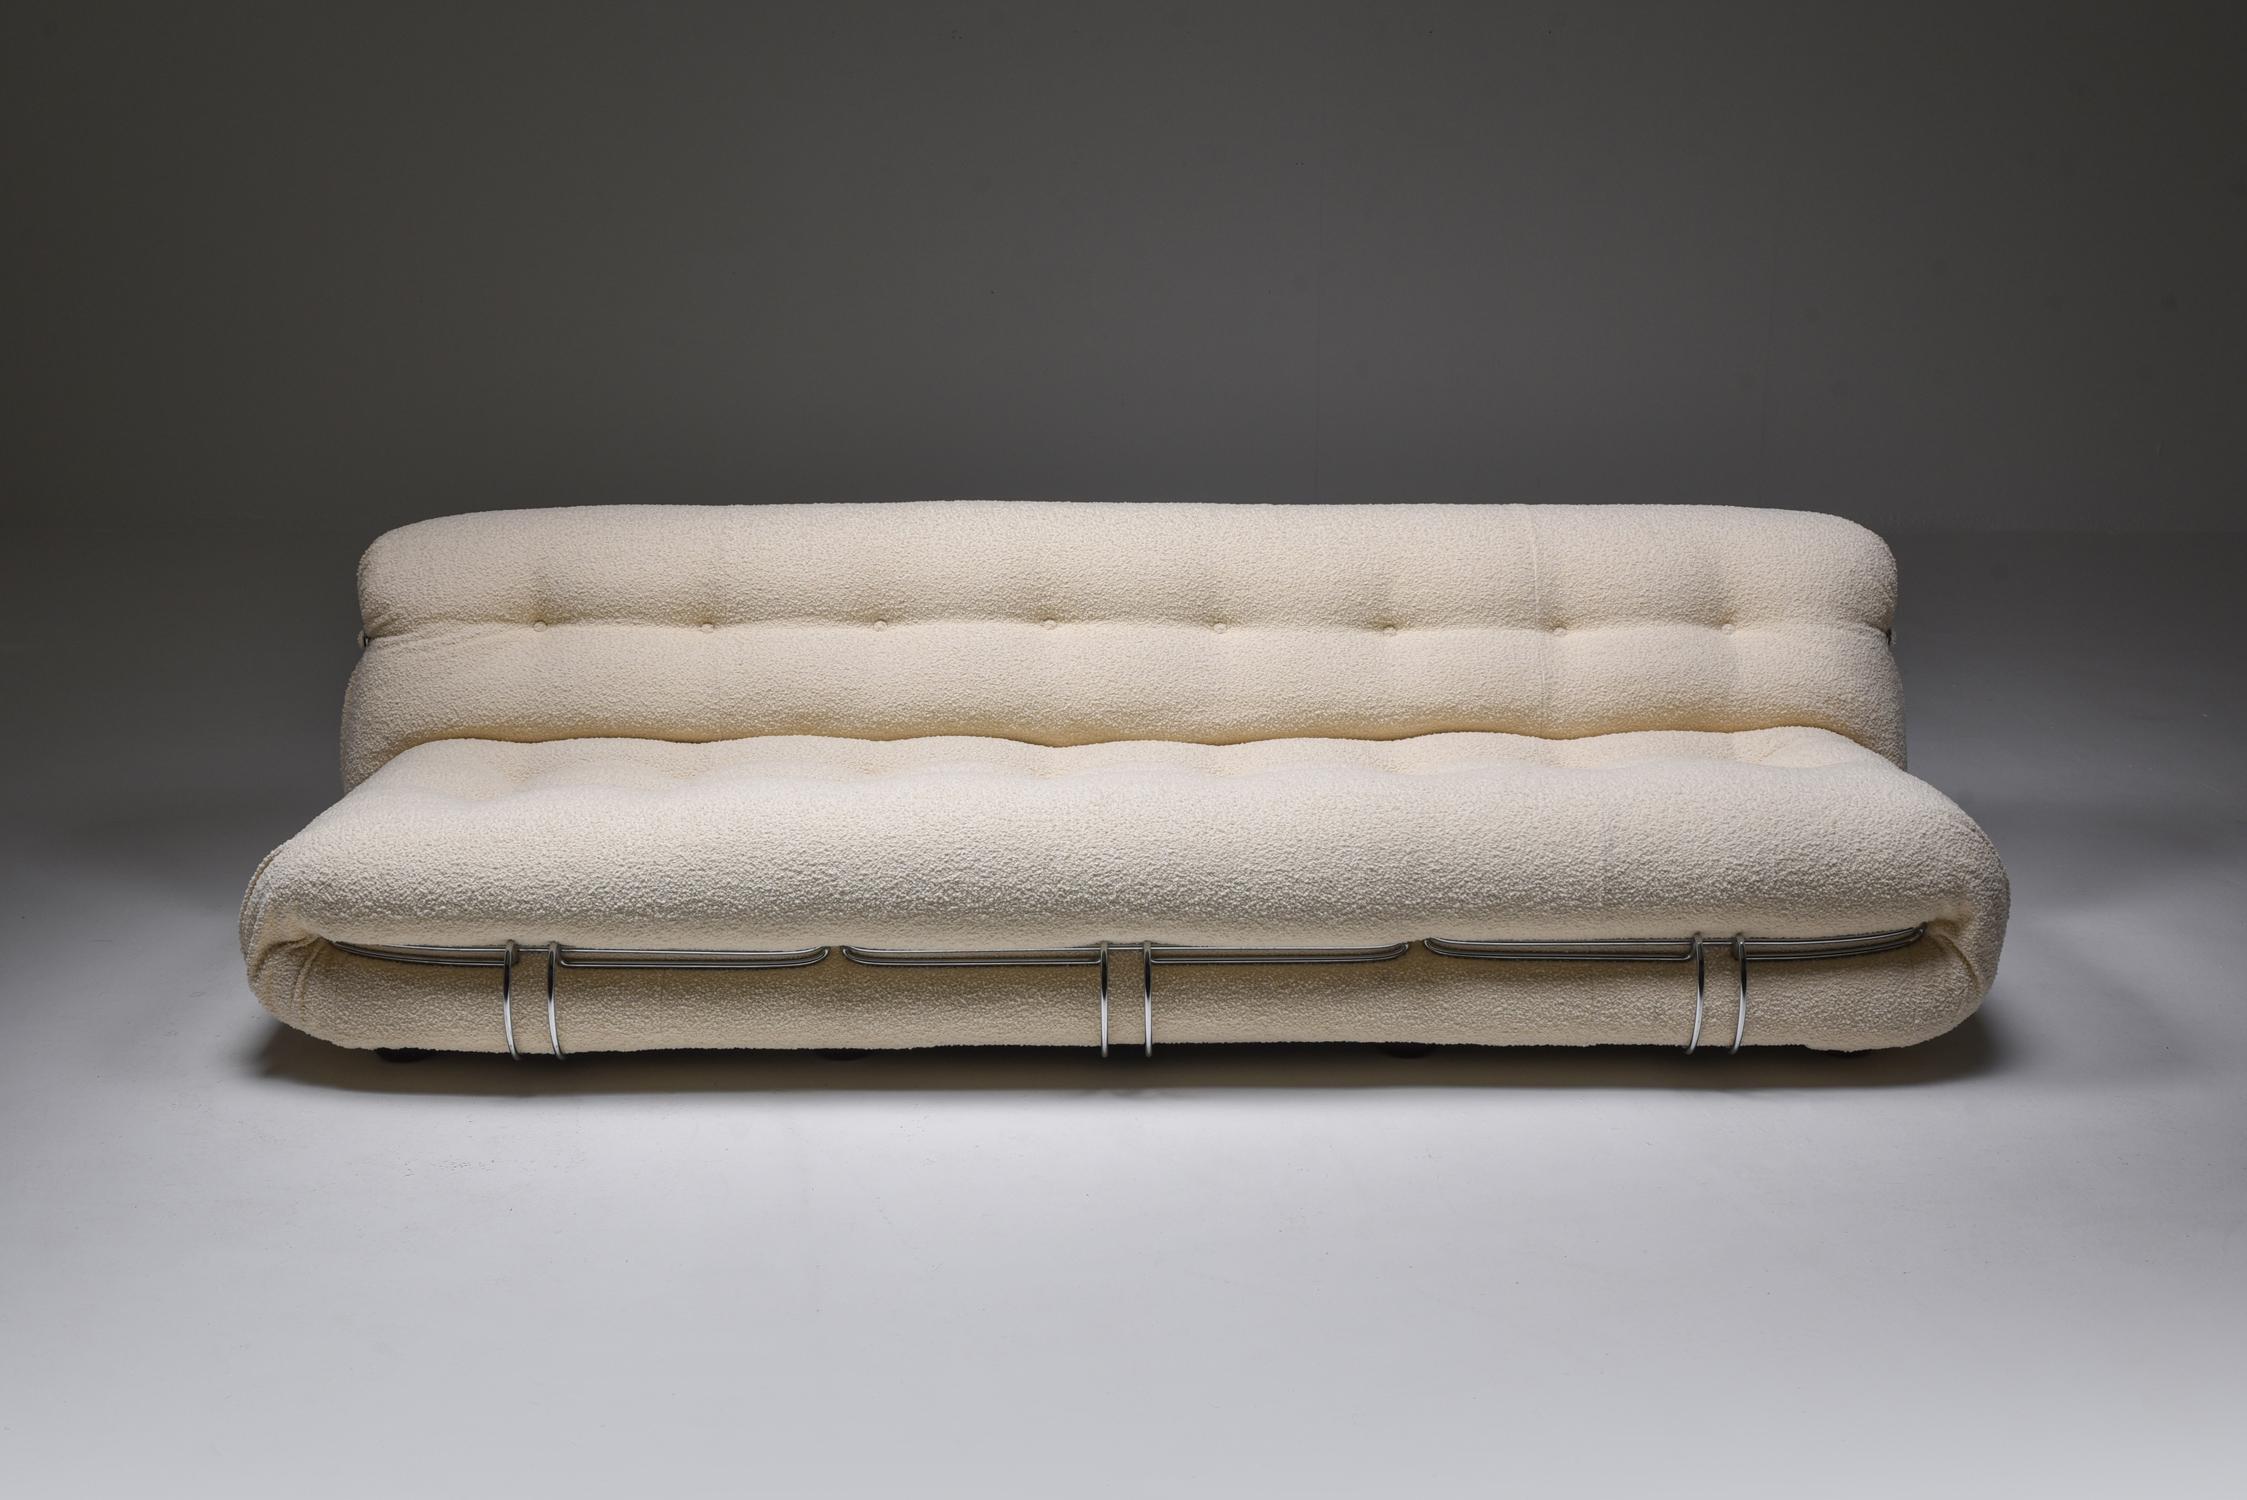 Post-Modern Cassina 'Soriana' Four-Seater Sofa by Afra and Tobia Scarpa in Bouclé, 1970's For Sale